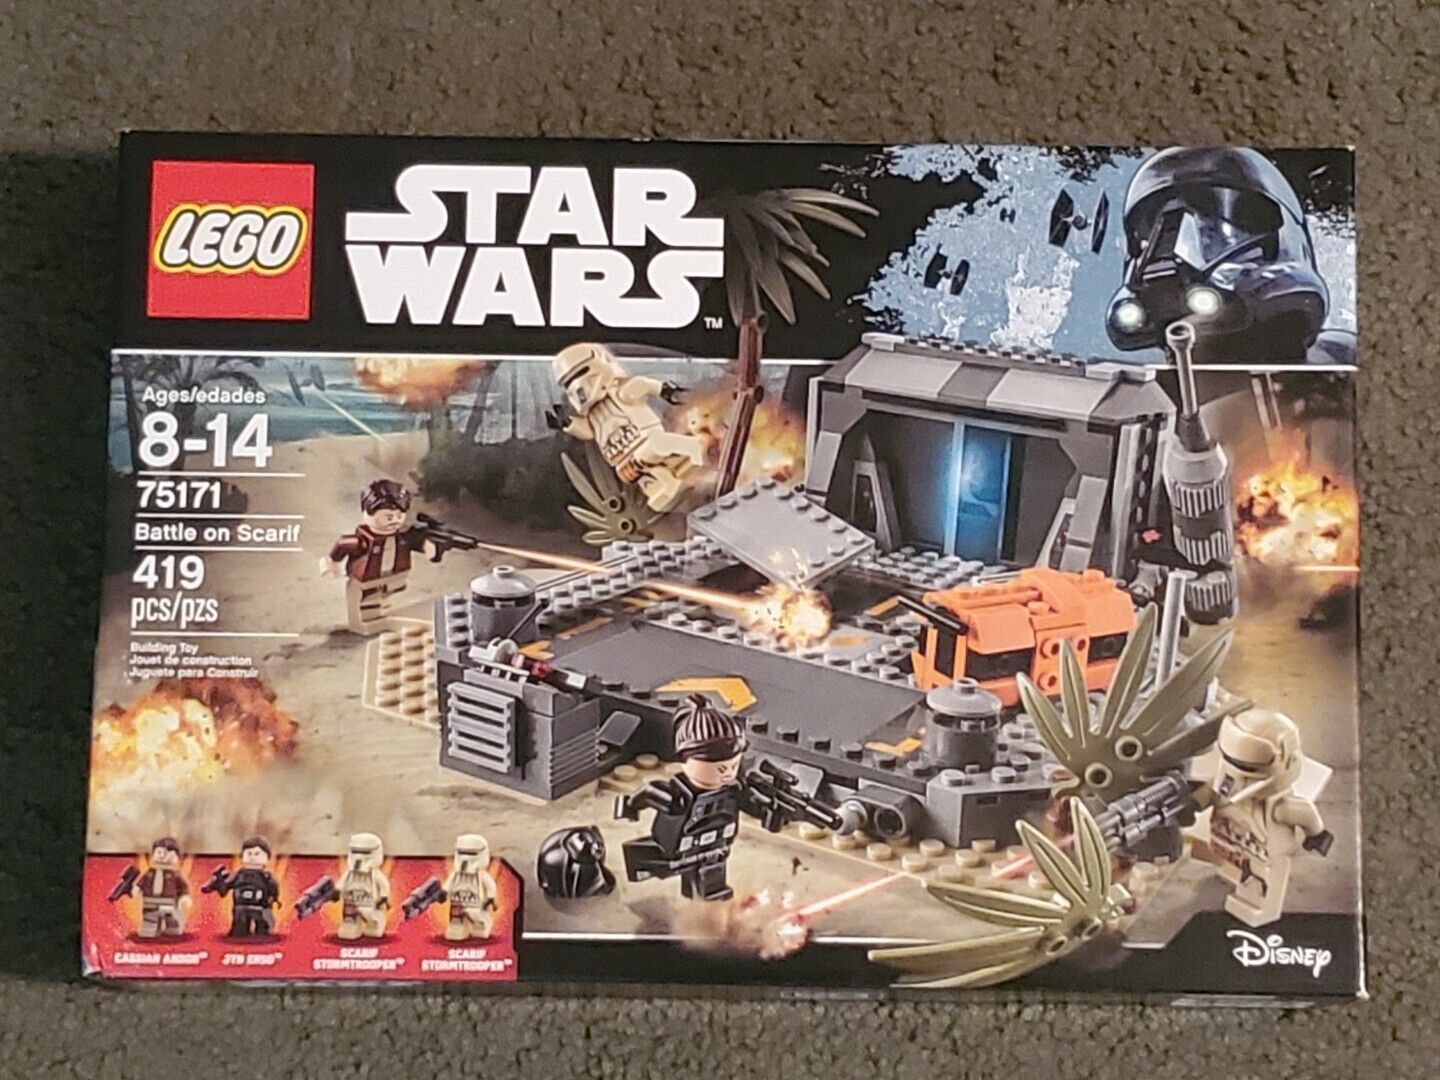 Retired Set #75171 LEGO Star Wars Rogue One Battle On Scarif 419 Pieces - NEW